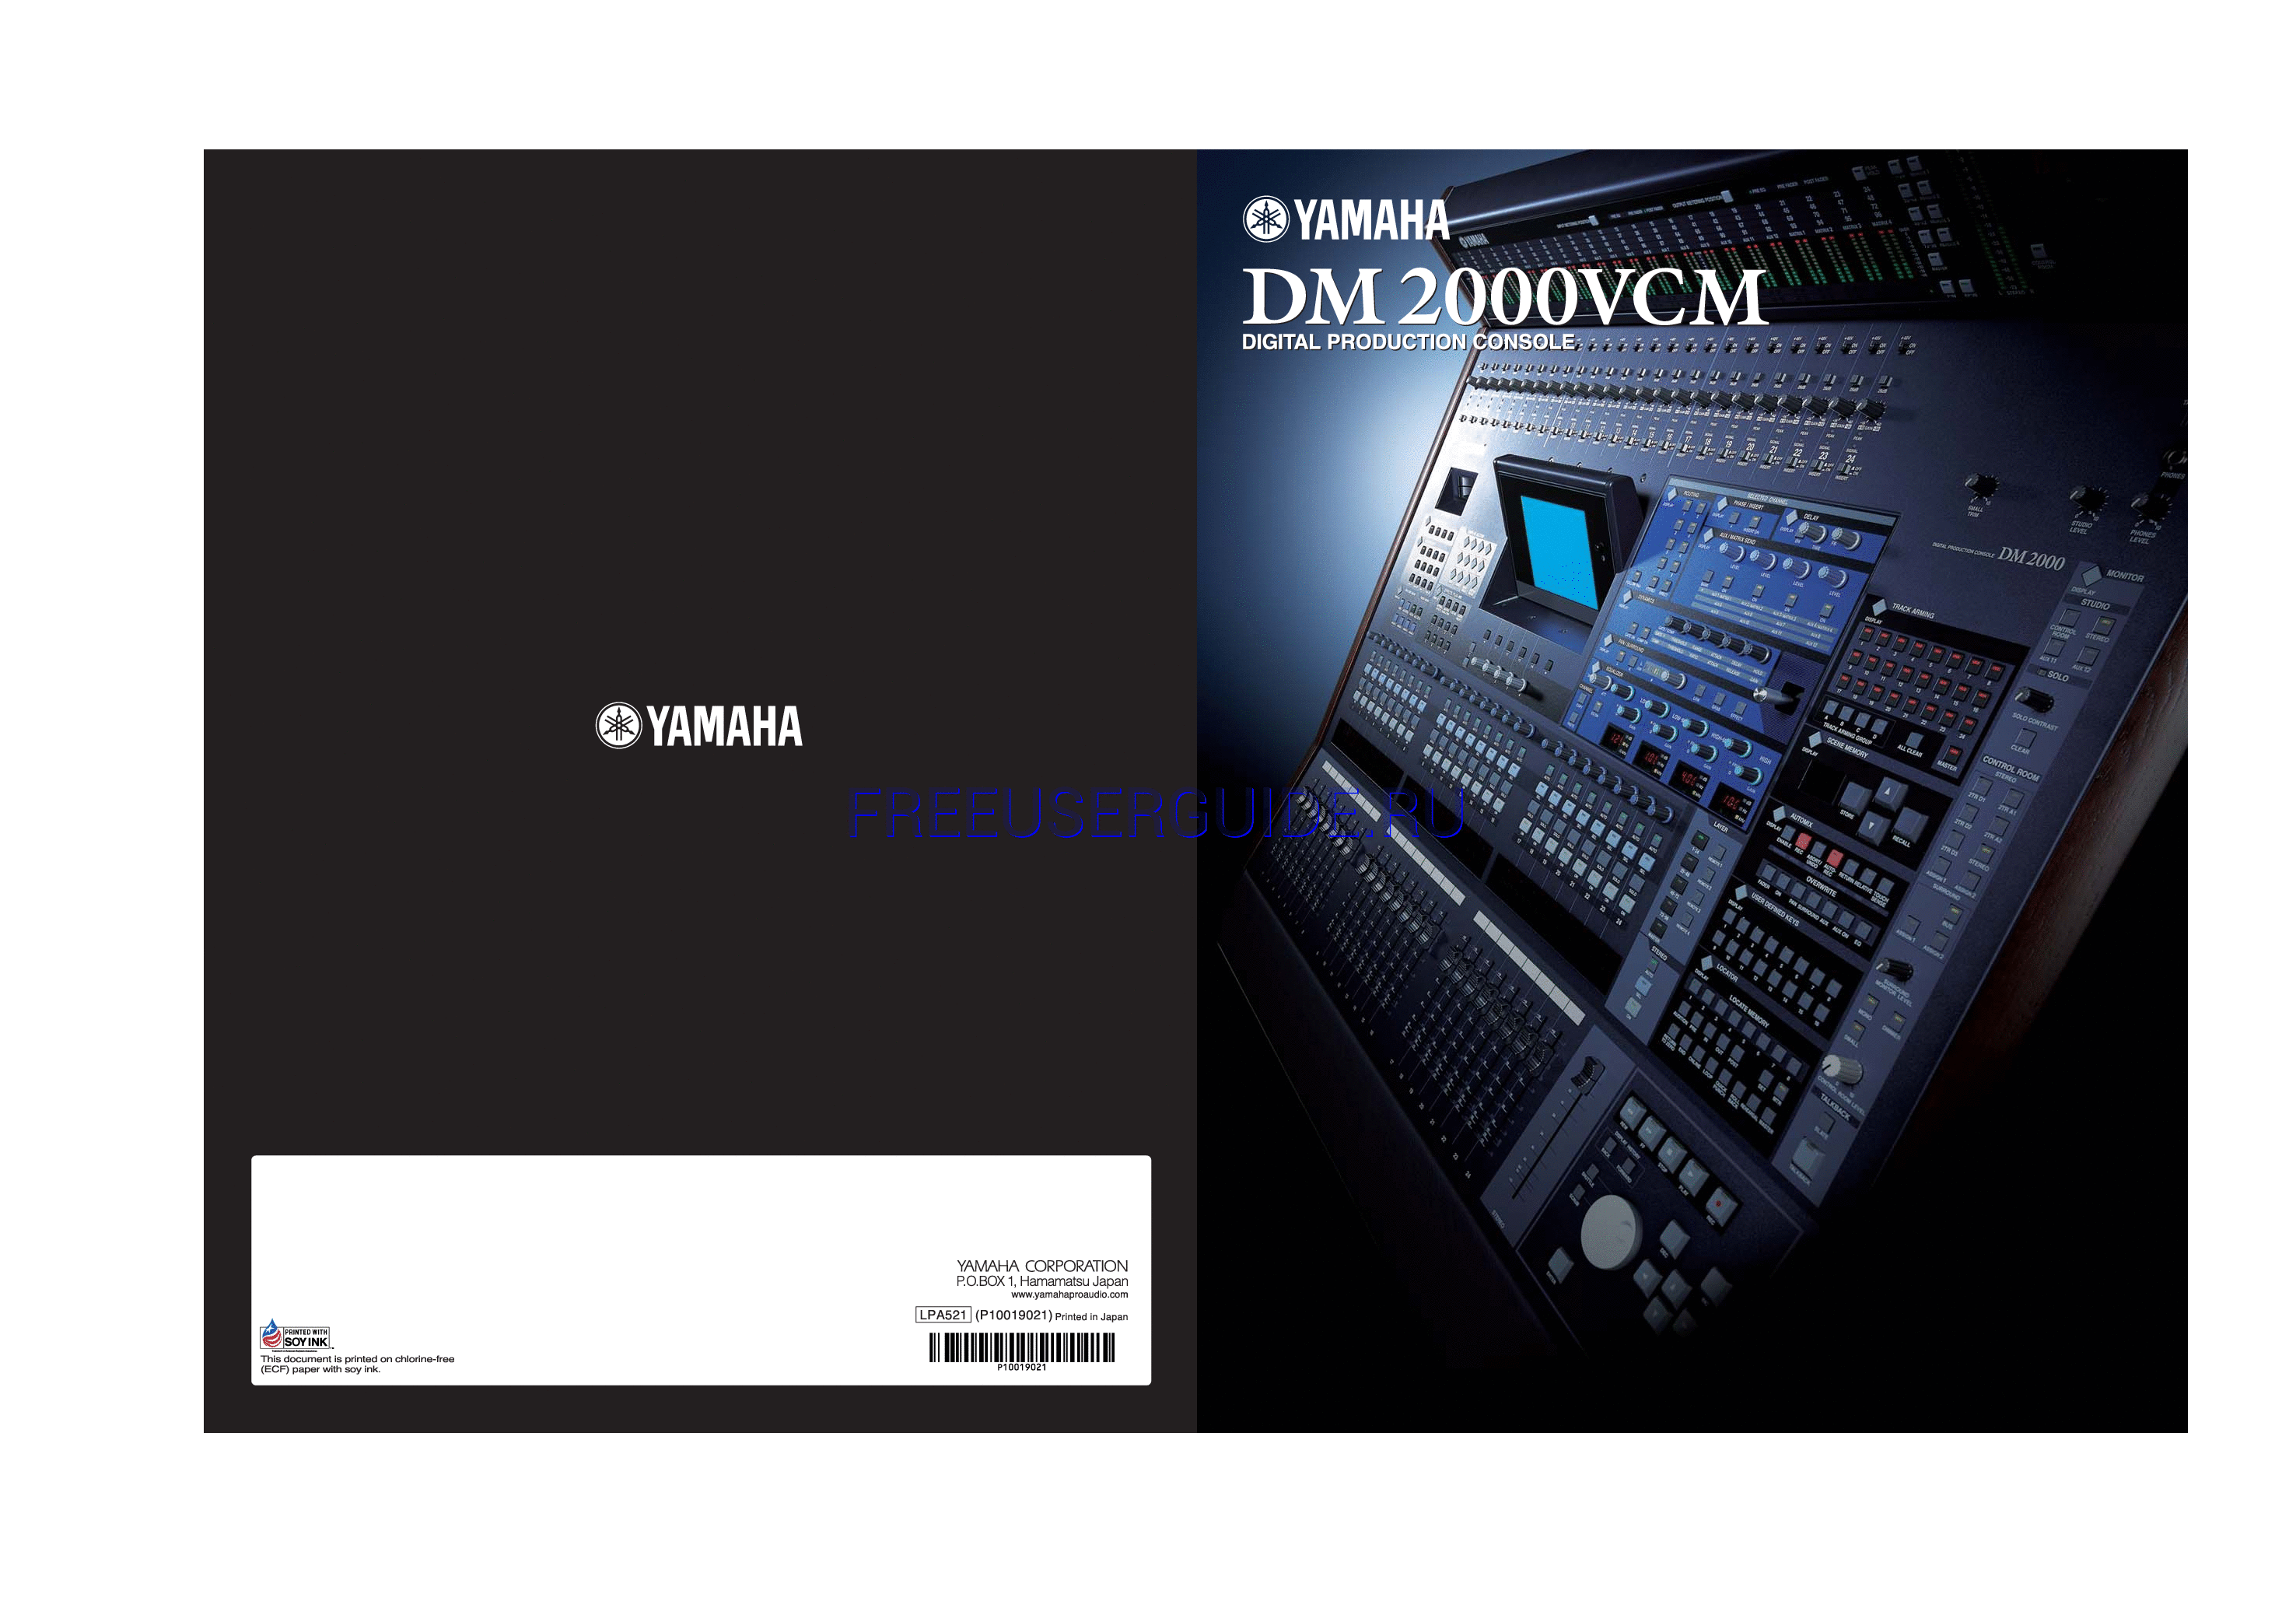 Read online User's Manual for Yamaha DM 2000VCM (Page 1)